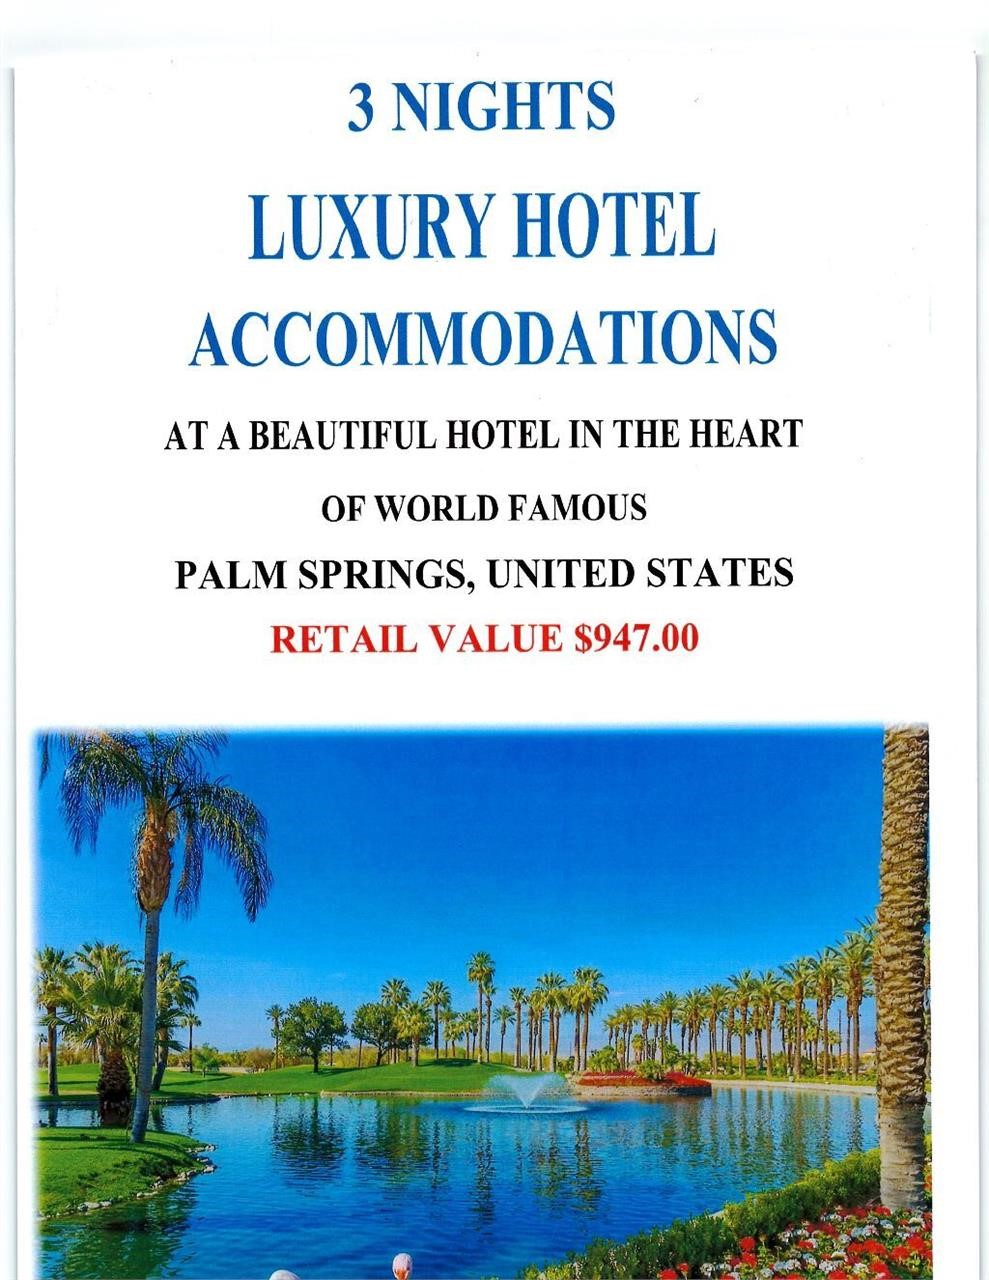 March 17TH. Vacation Hotel Accommodation Packages Auction